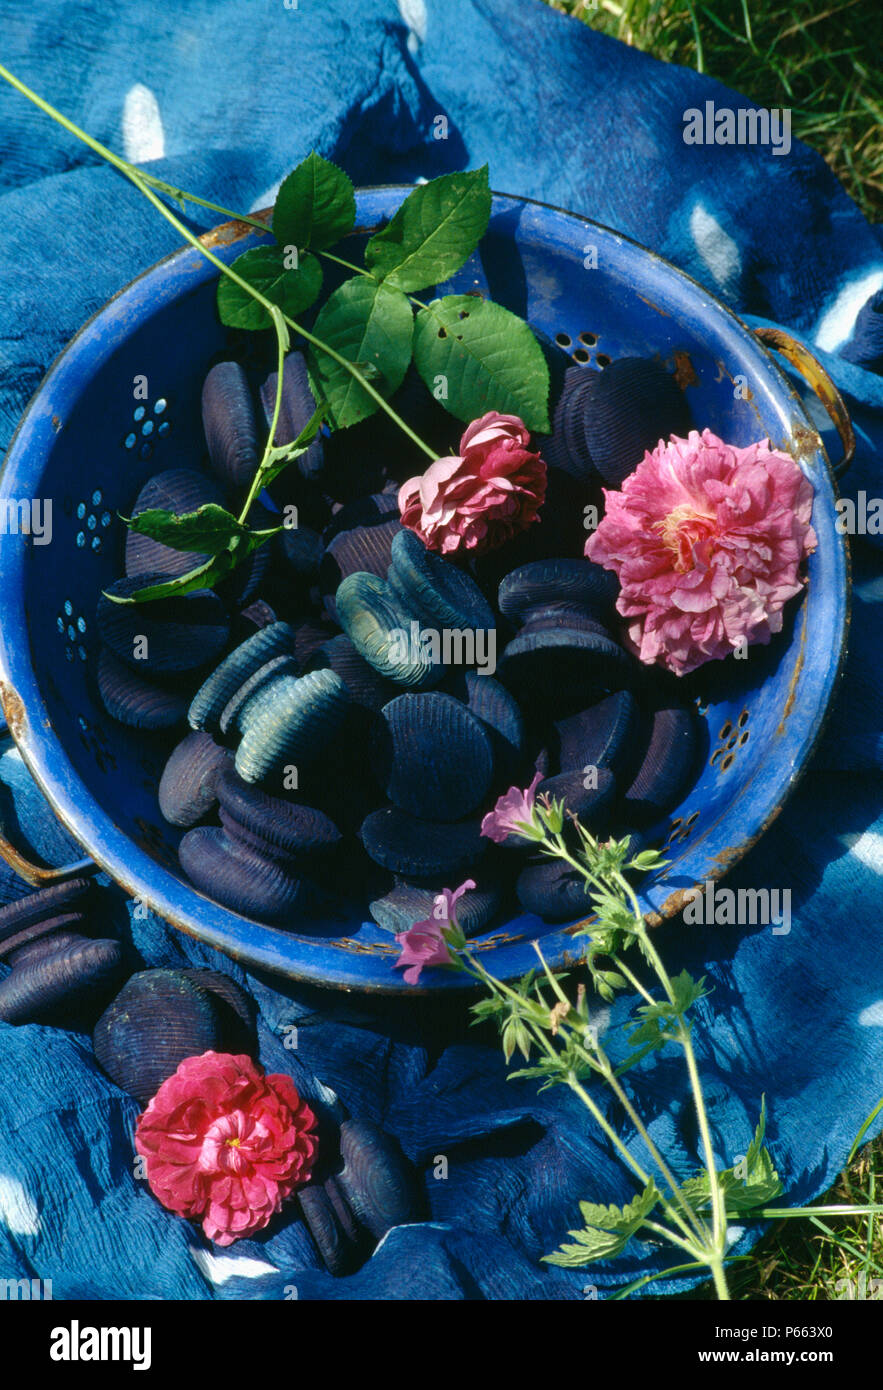 Still-Life of single pink roses with indigo dyed door-knobs in blue bowl on blue indigo-dyed fabric Stock Photo